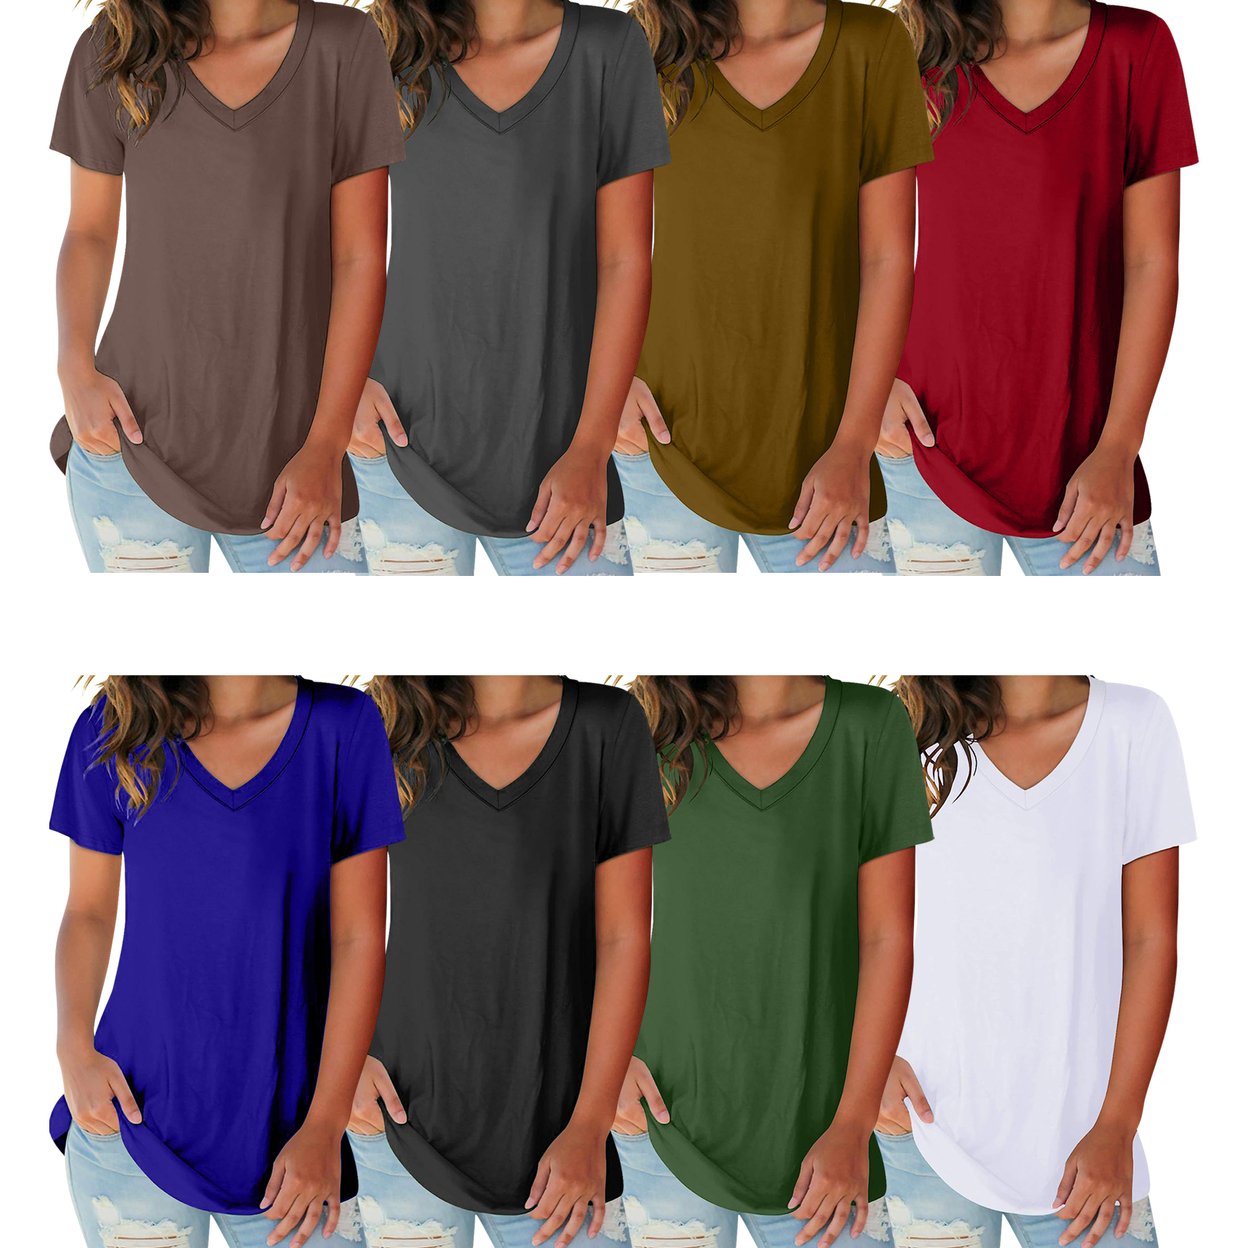 3-Pack: Women's Ultra Soft Smooth Cotton Blend Basic V-Neck Short Sleeve Shirts - Black Navy, Red, Small